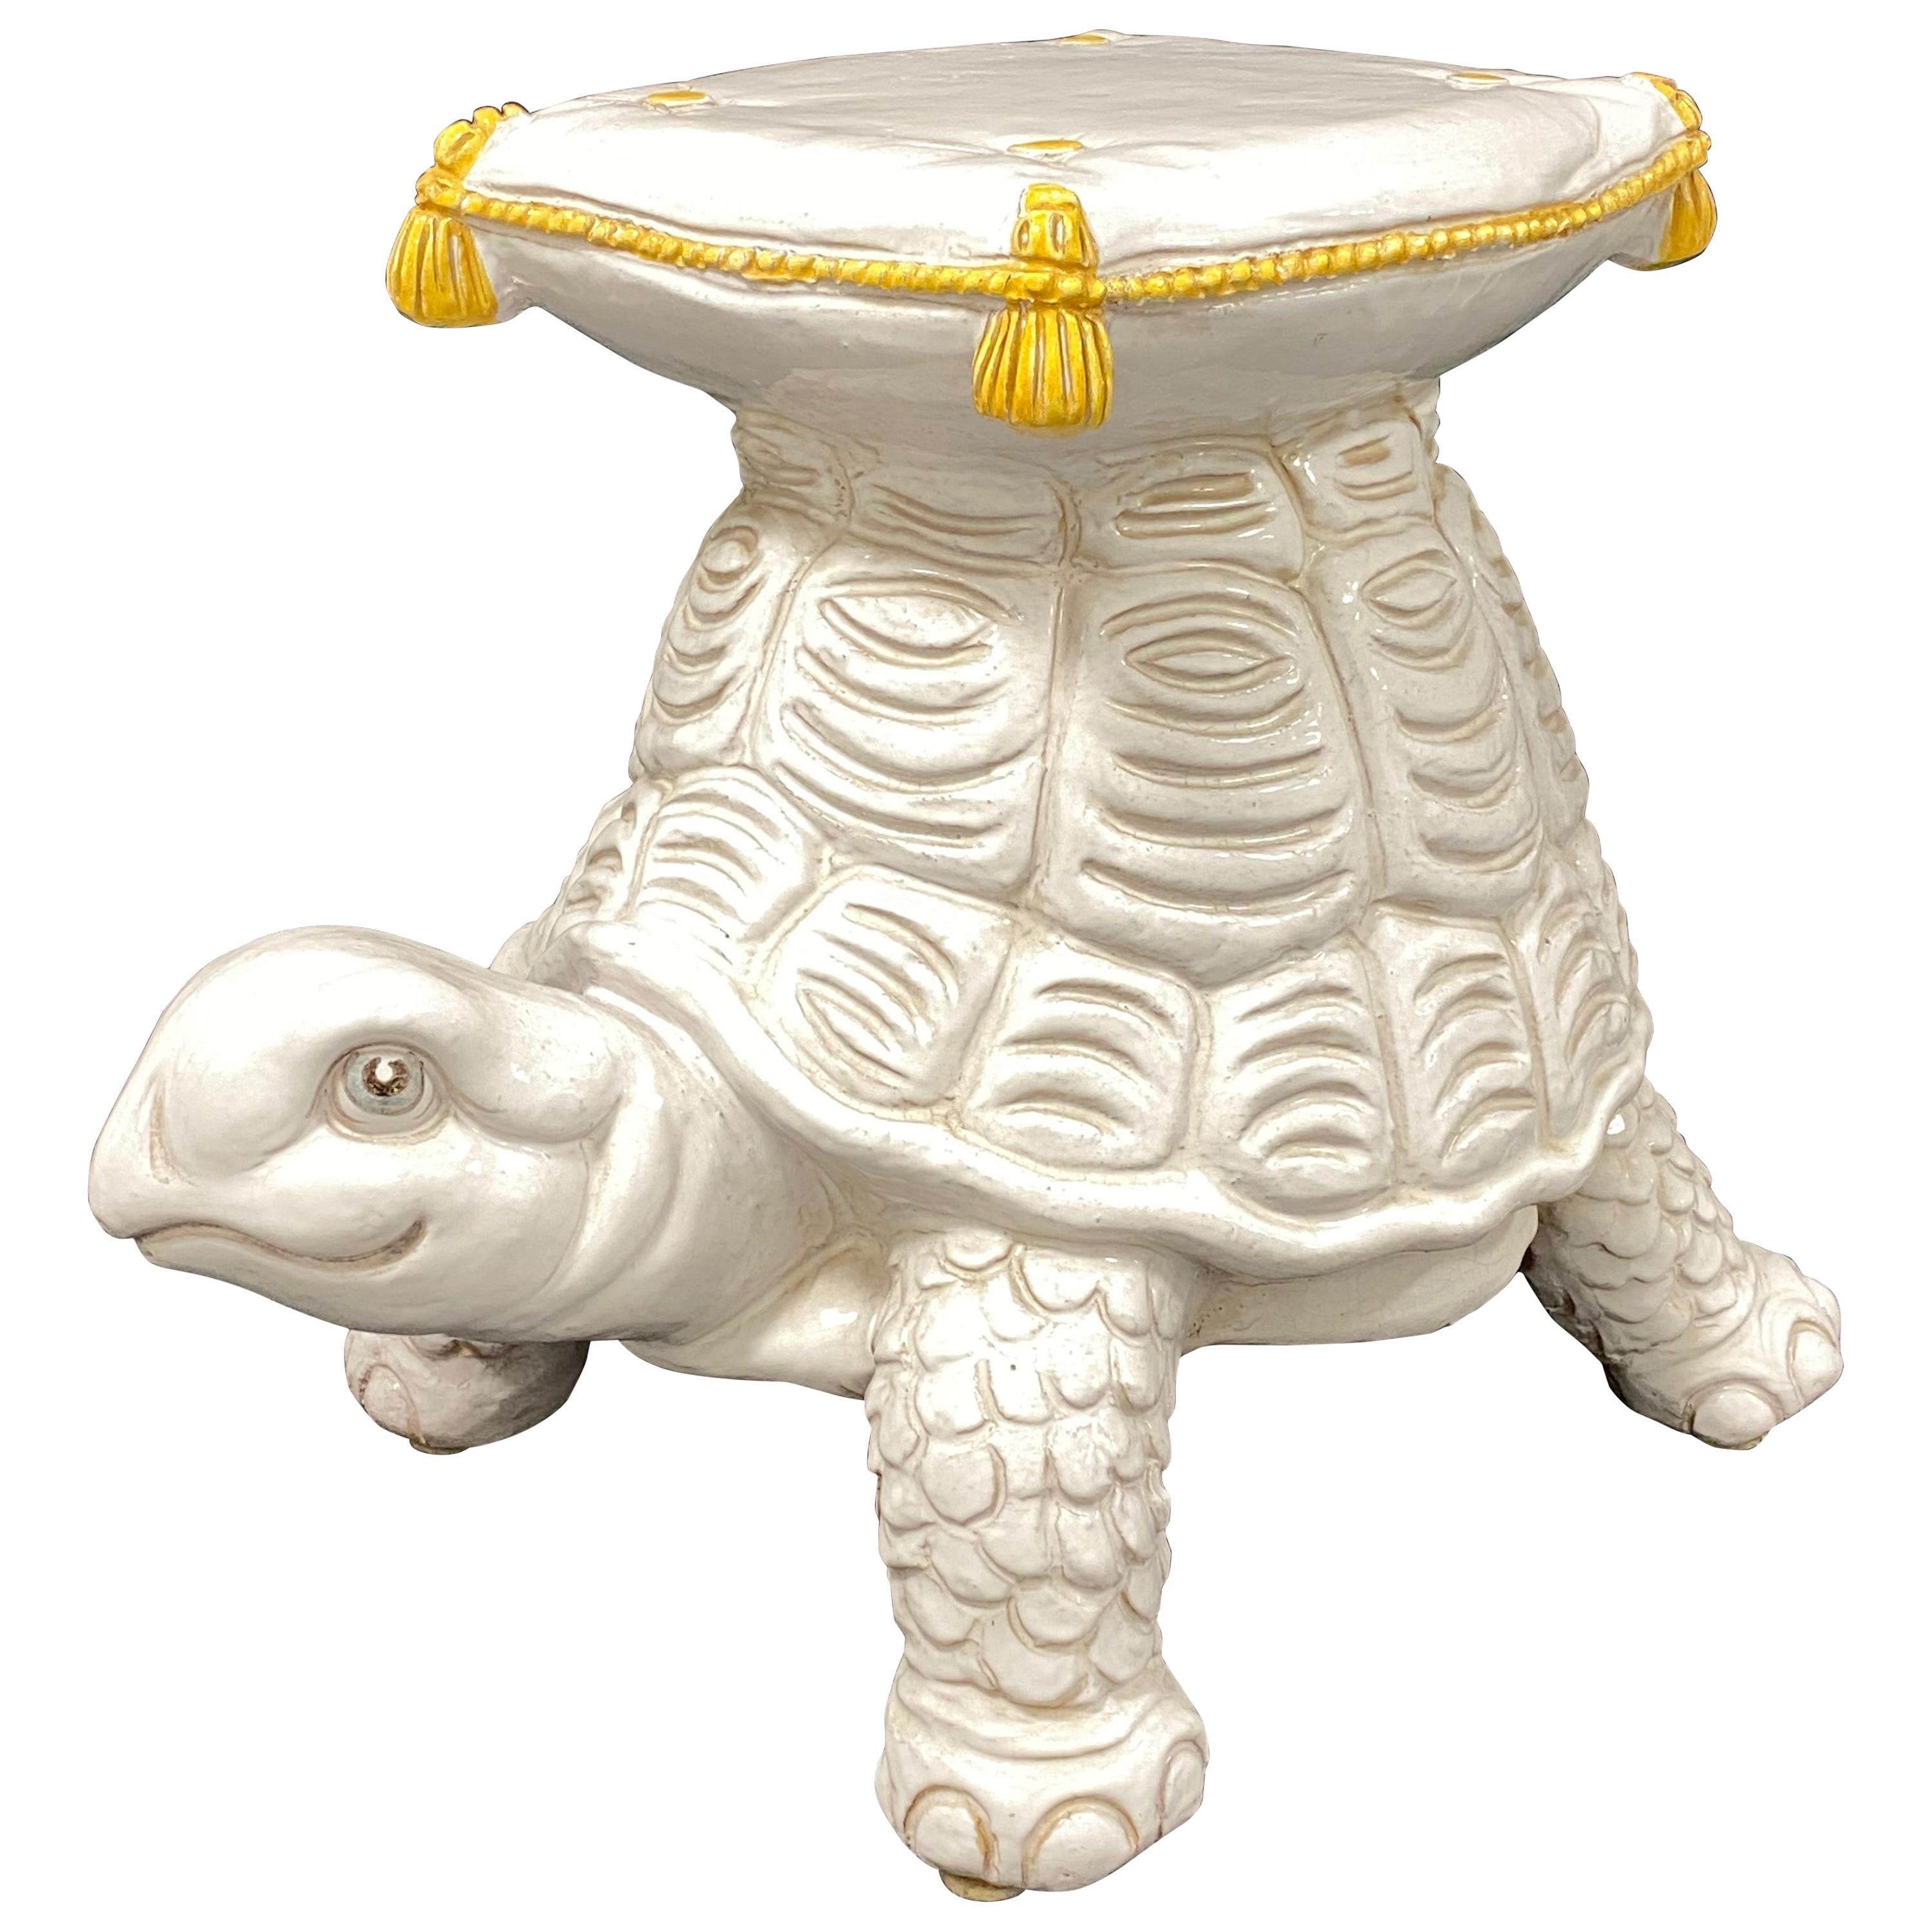 Hollywood Regency Terracotta Turtle Garden Plant Stand, Seat or Patio Decoration